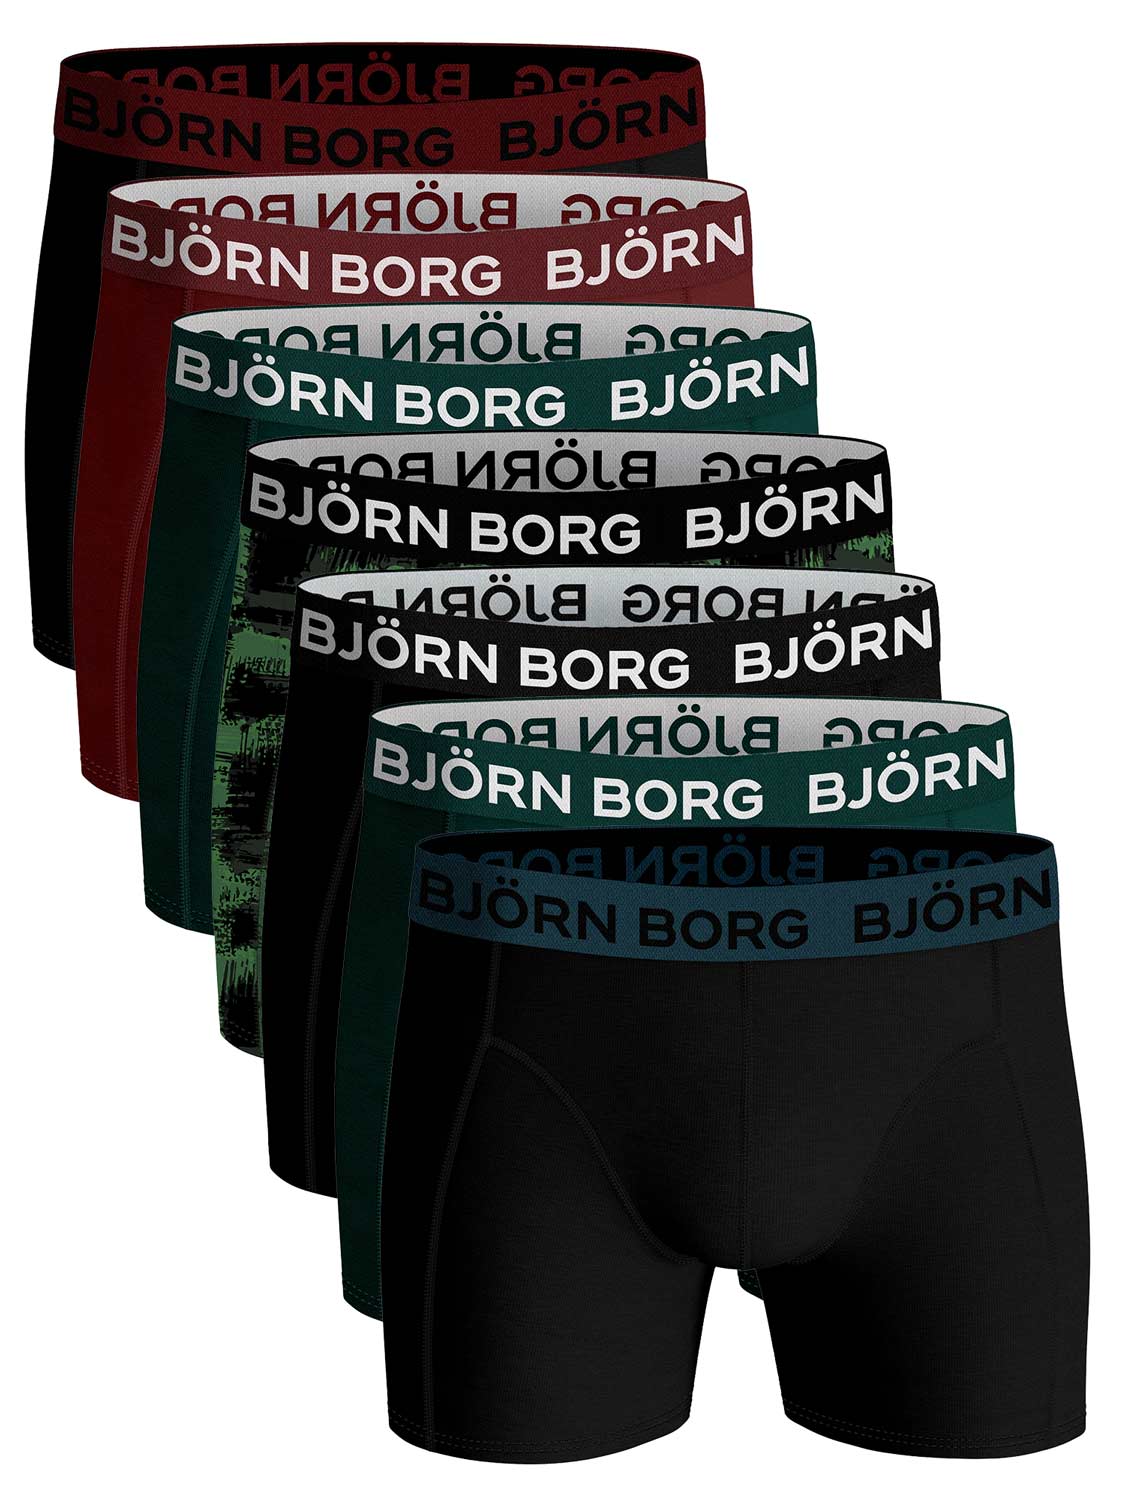 Björn Borg Cotton Stretch boxers - heren boxers normale lengte (7-pack) - multicolor - Maat: L